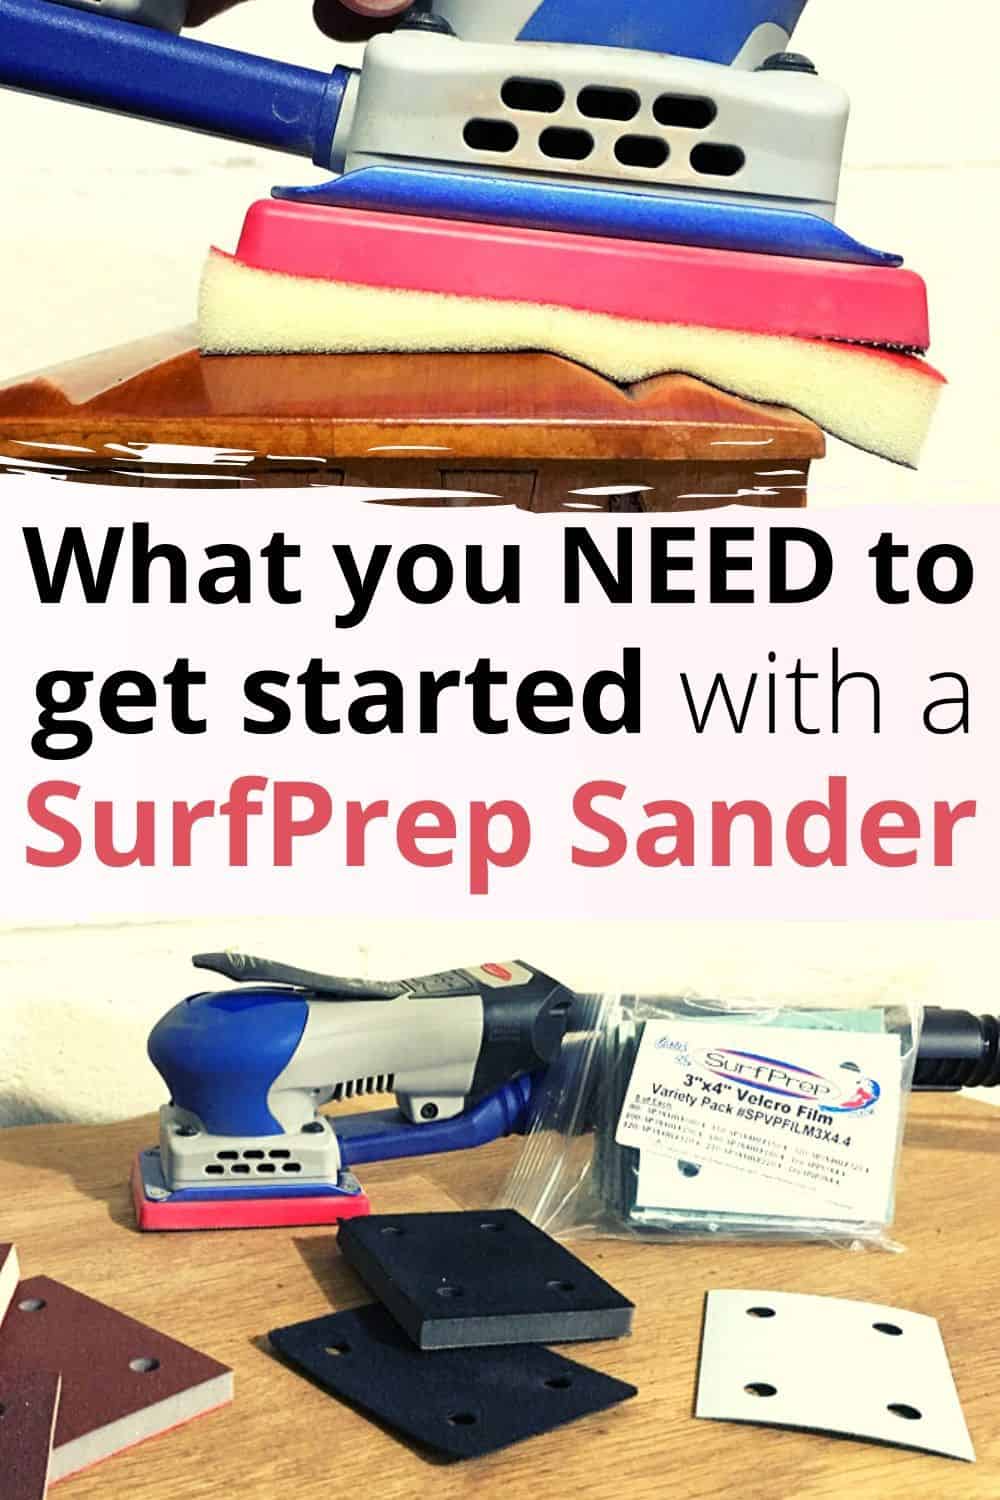 SurfPrep Sander – What you need to get started!